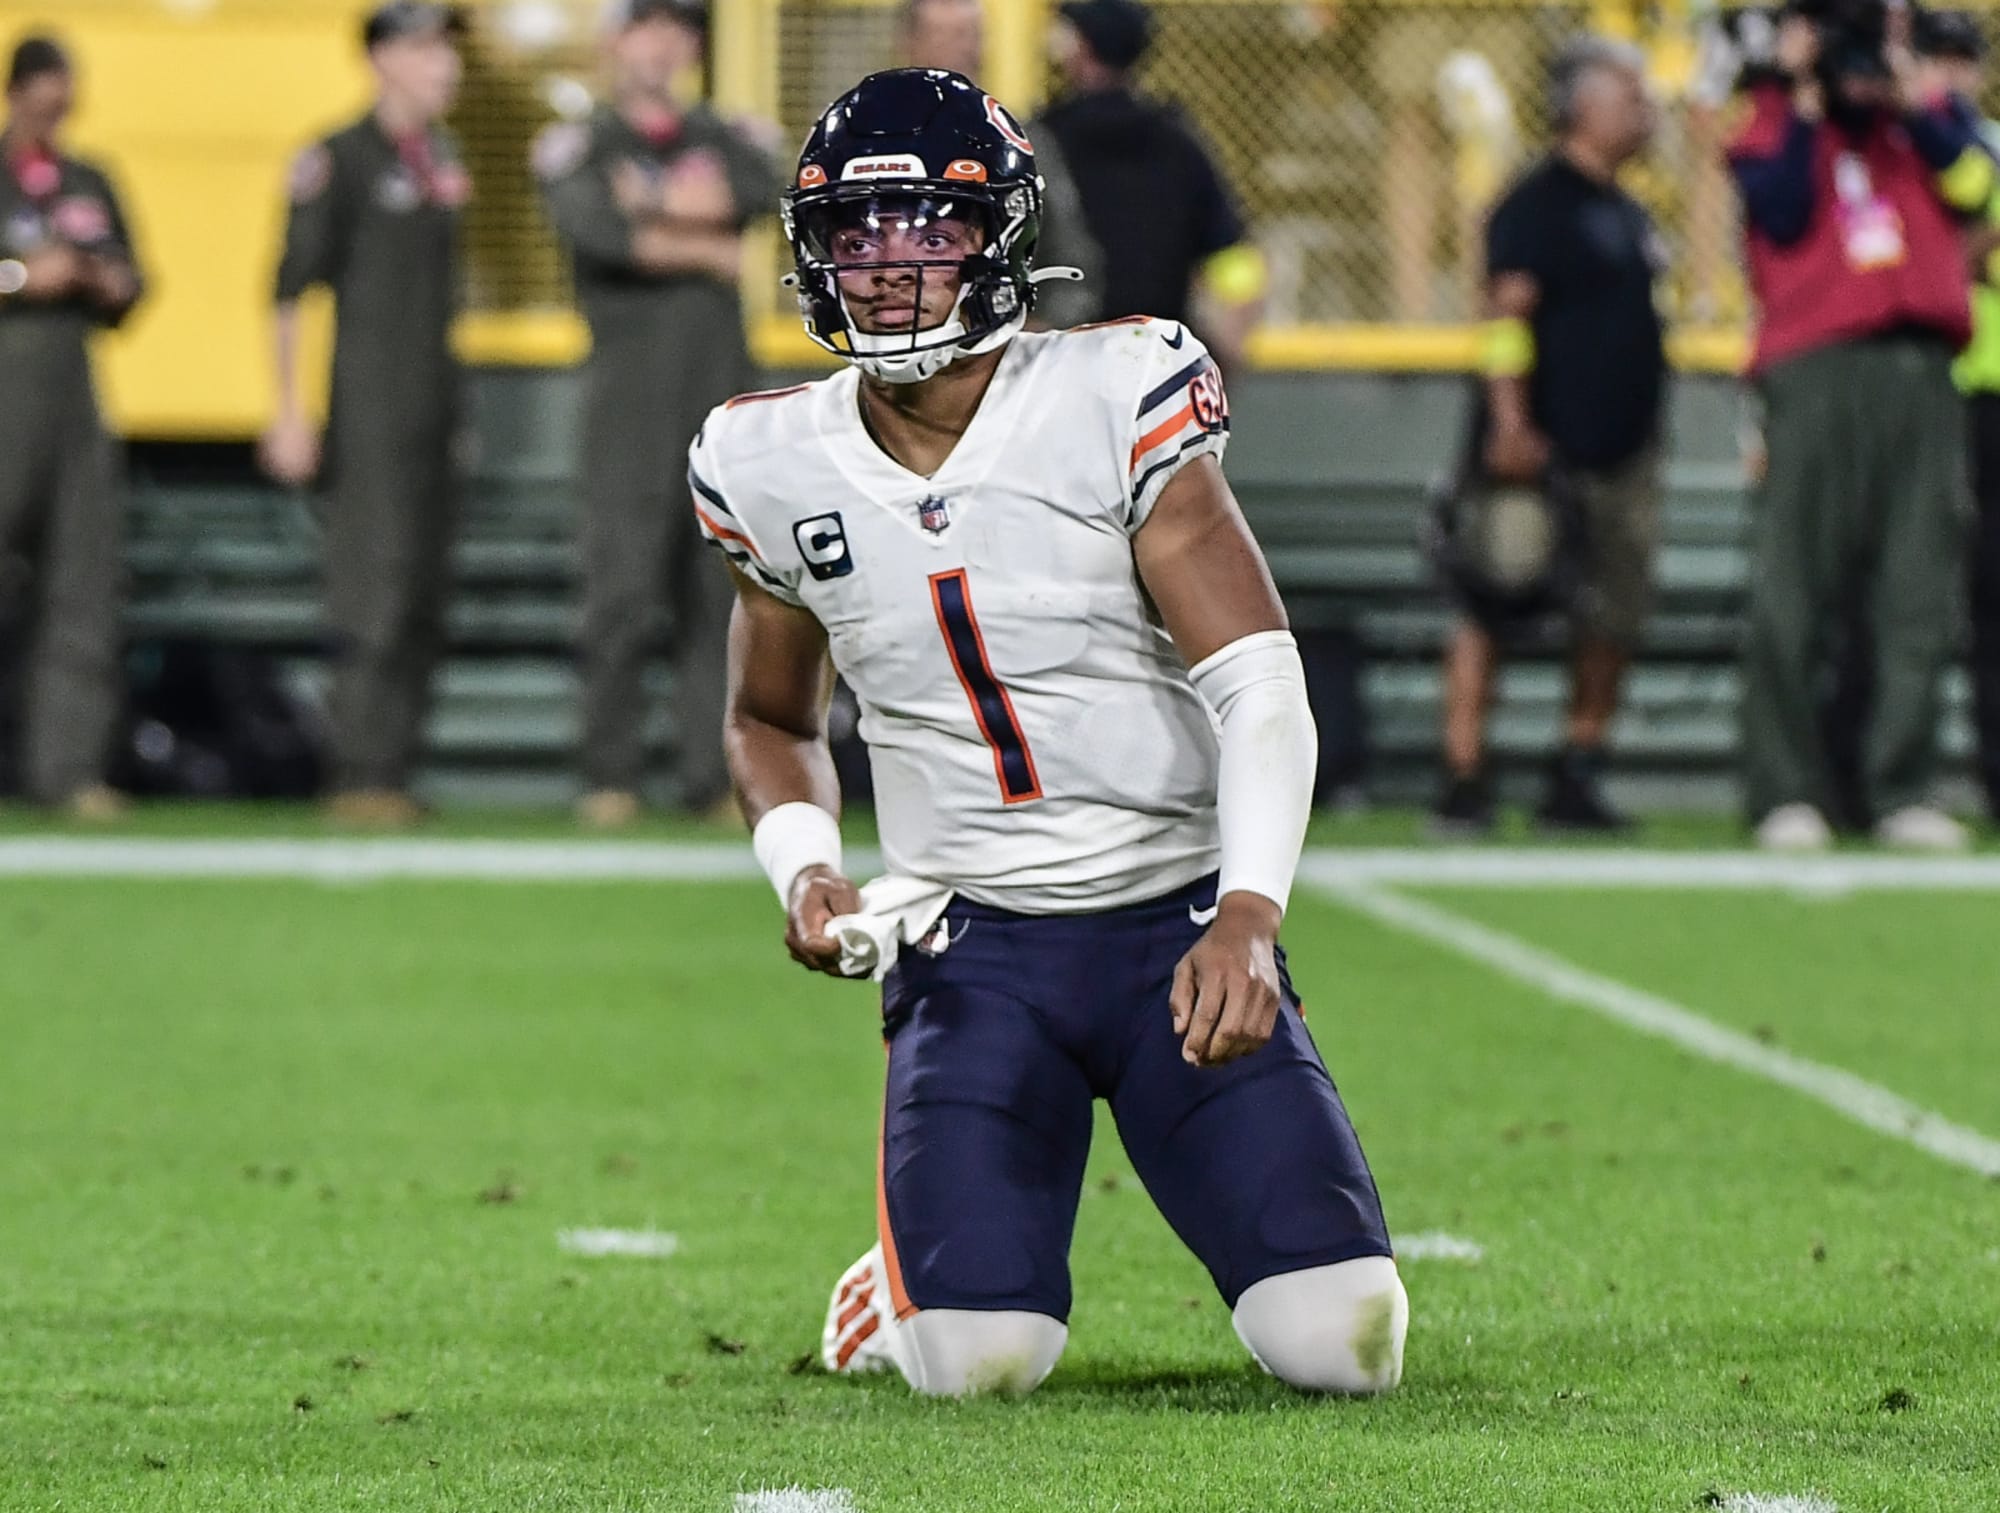 Chicago Bears loss to Green Bay Packers solidifies 2022 identity